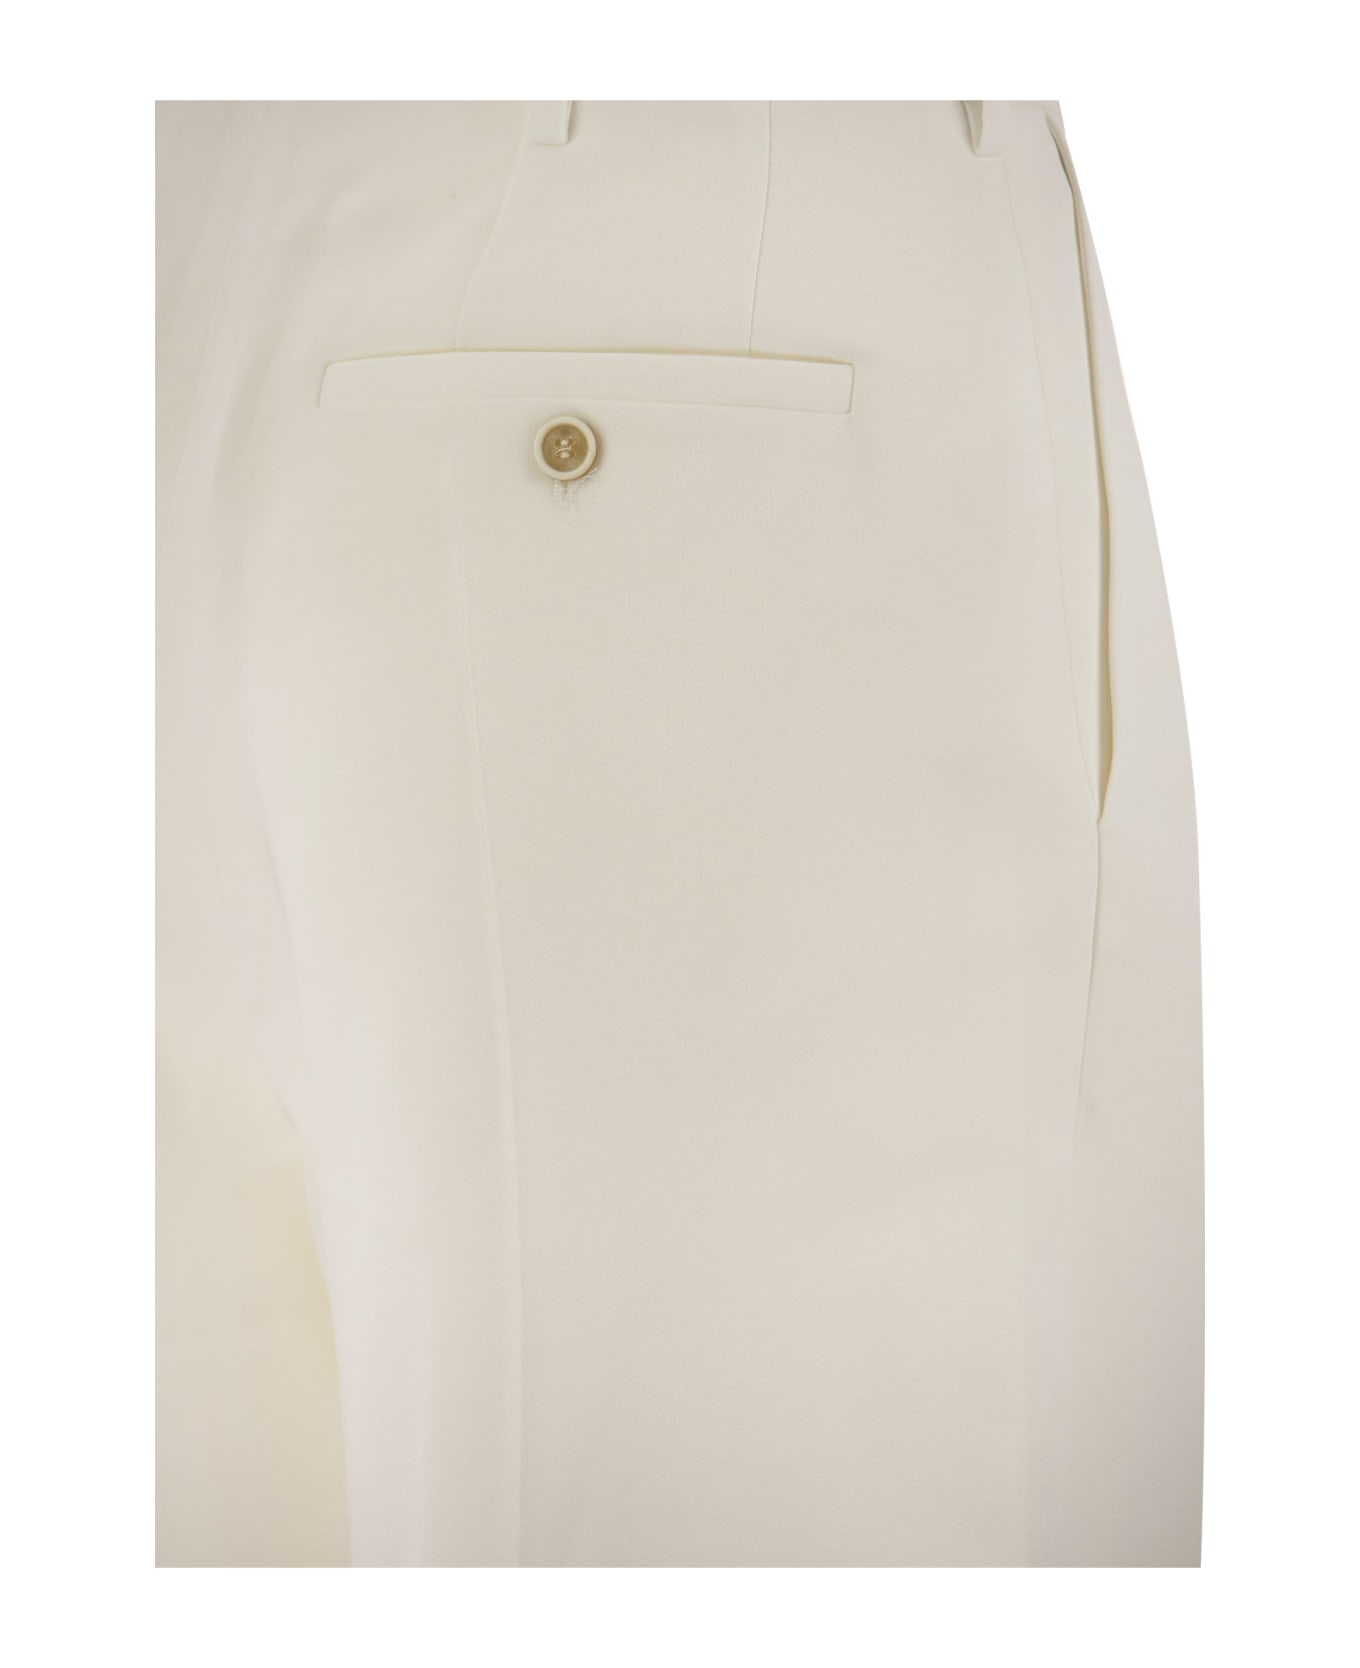 Marni Cady Tailored Trousers - White